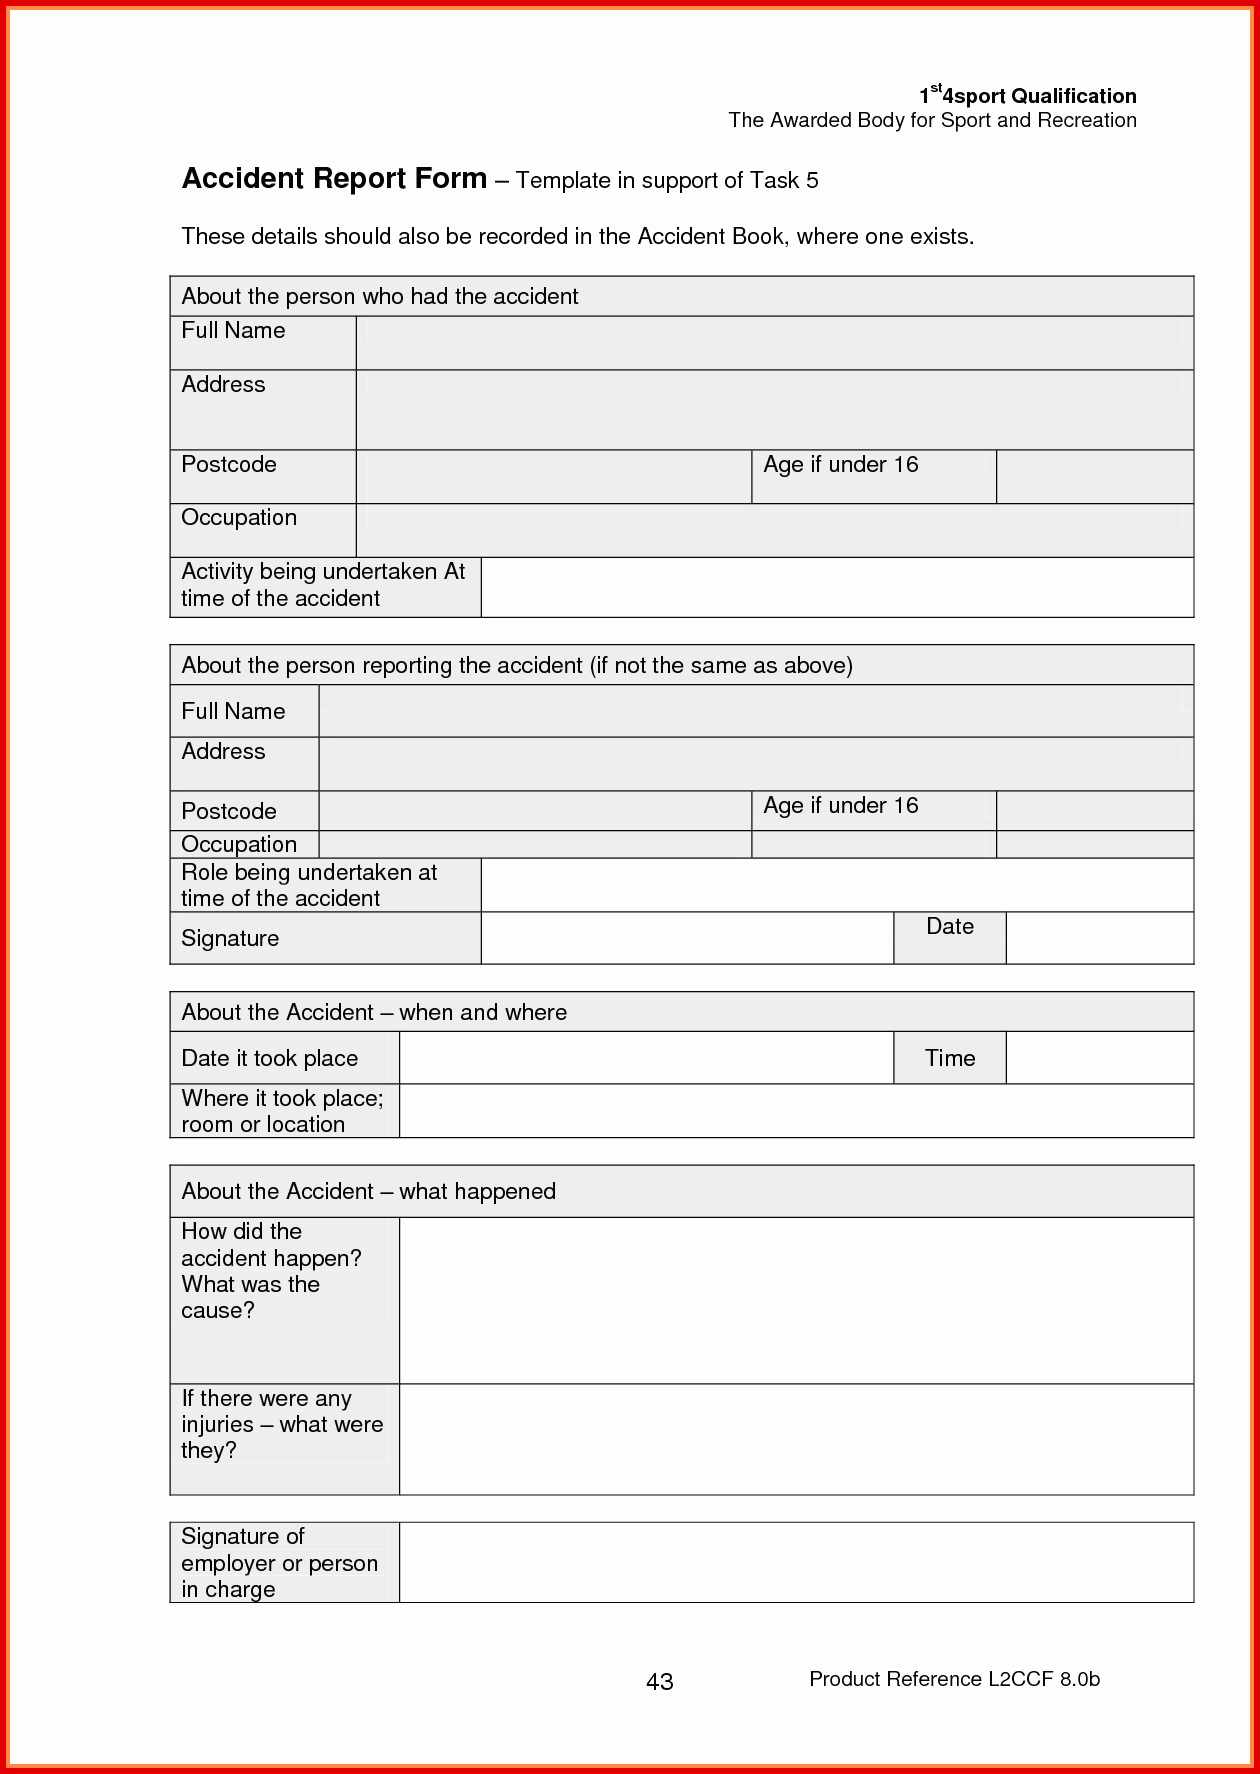 Employee Accident Report Template Fresh Accident Report Example